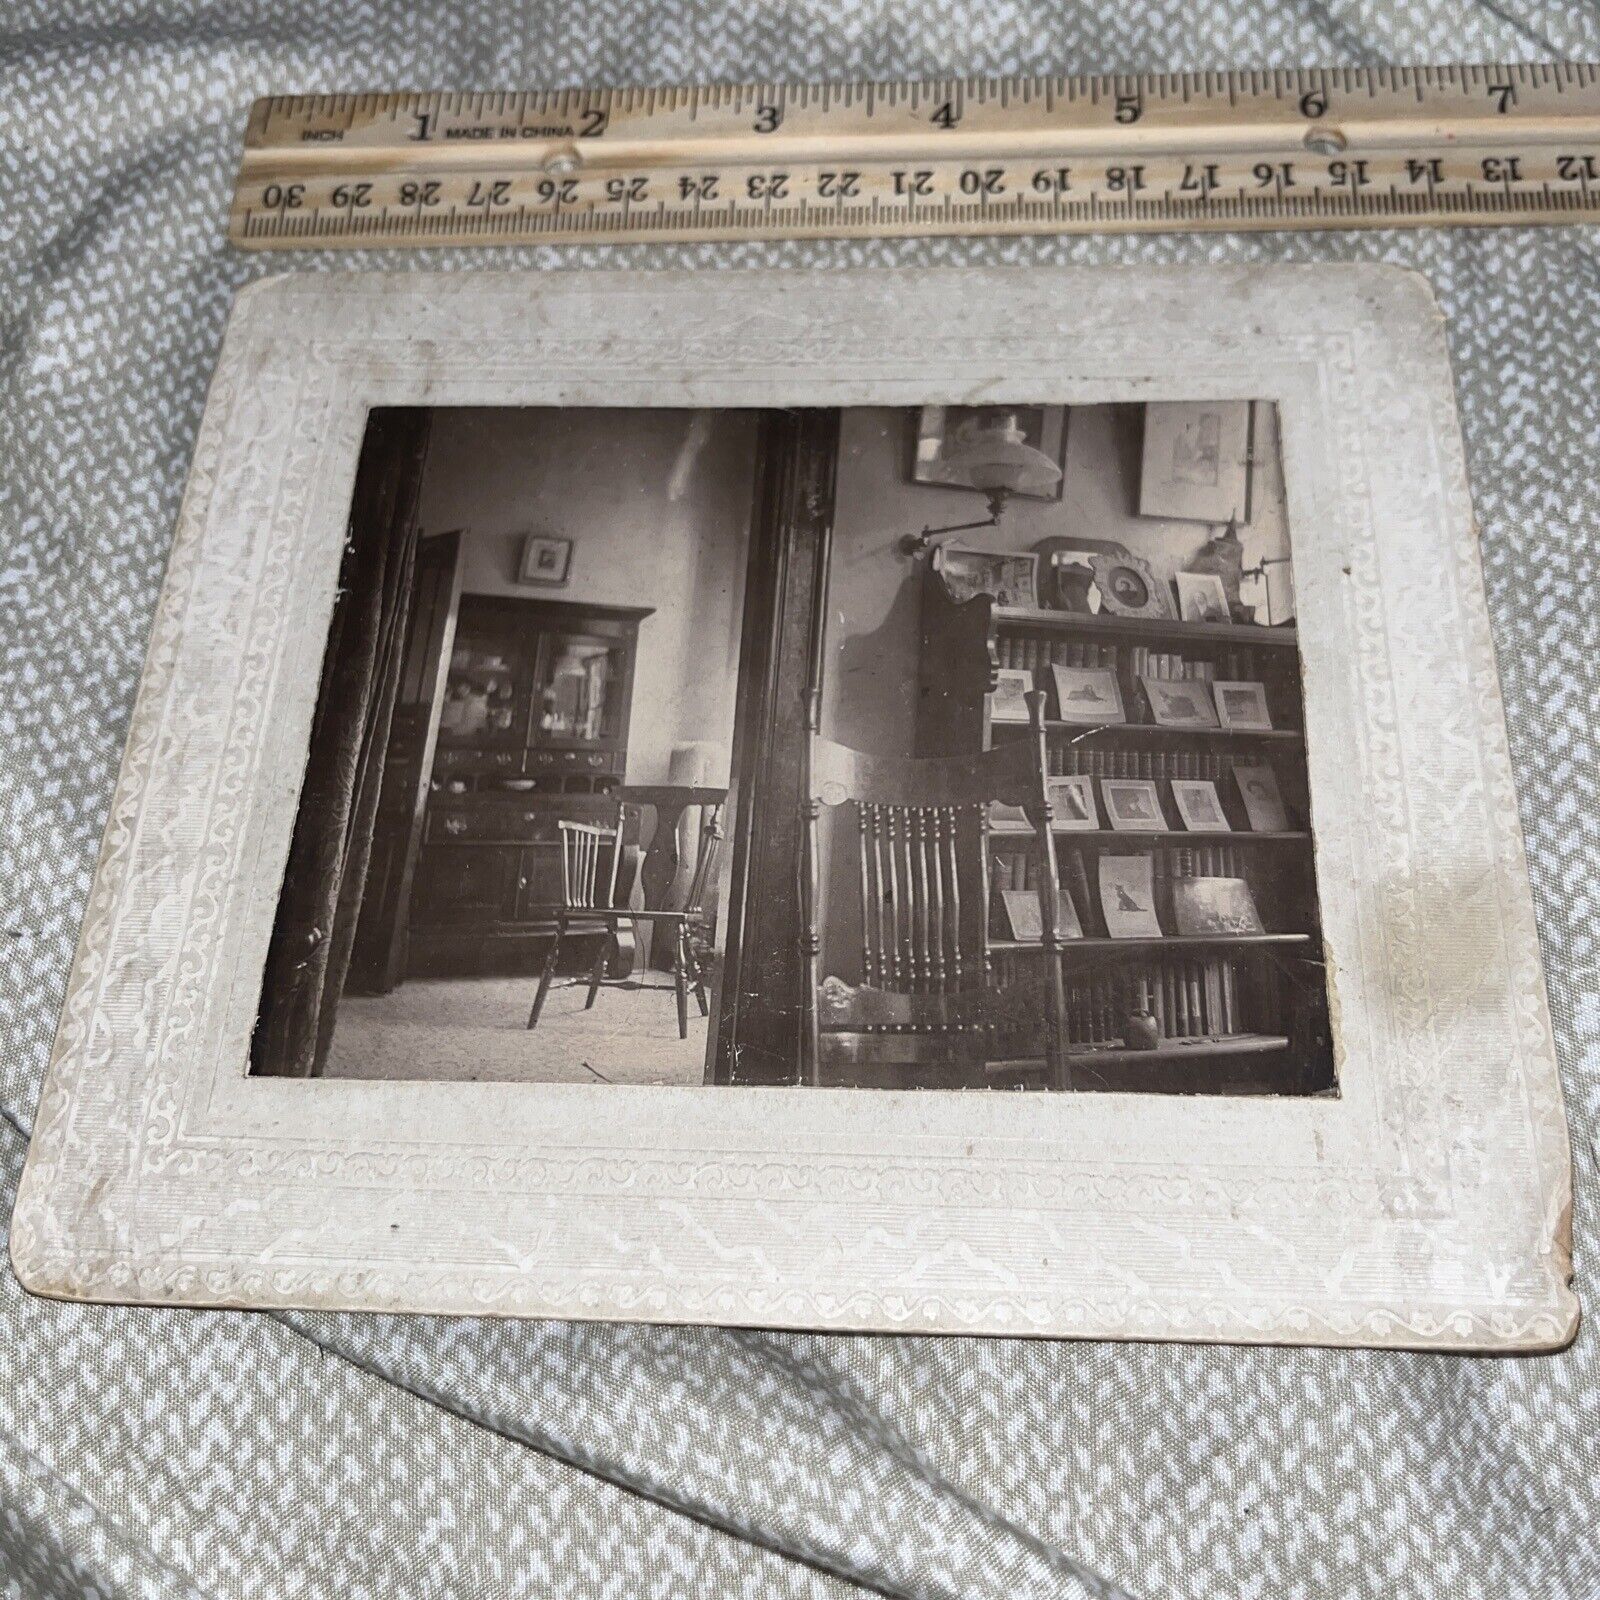 Rare Antique 6.5 x 5.5” Mounted Photo of Home with Bookcase Full of Photographs